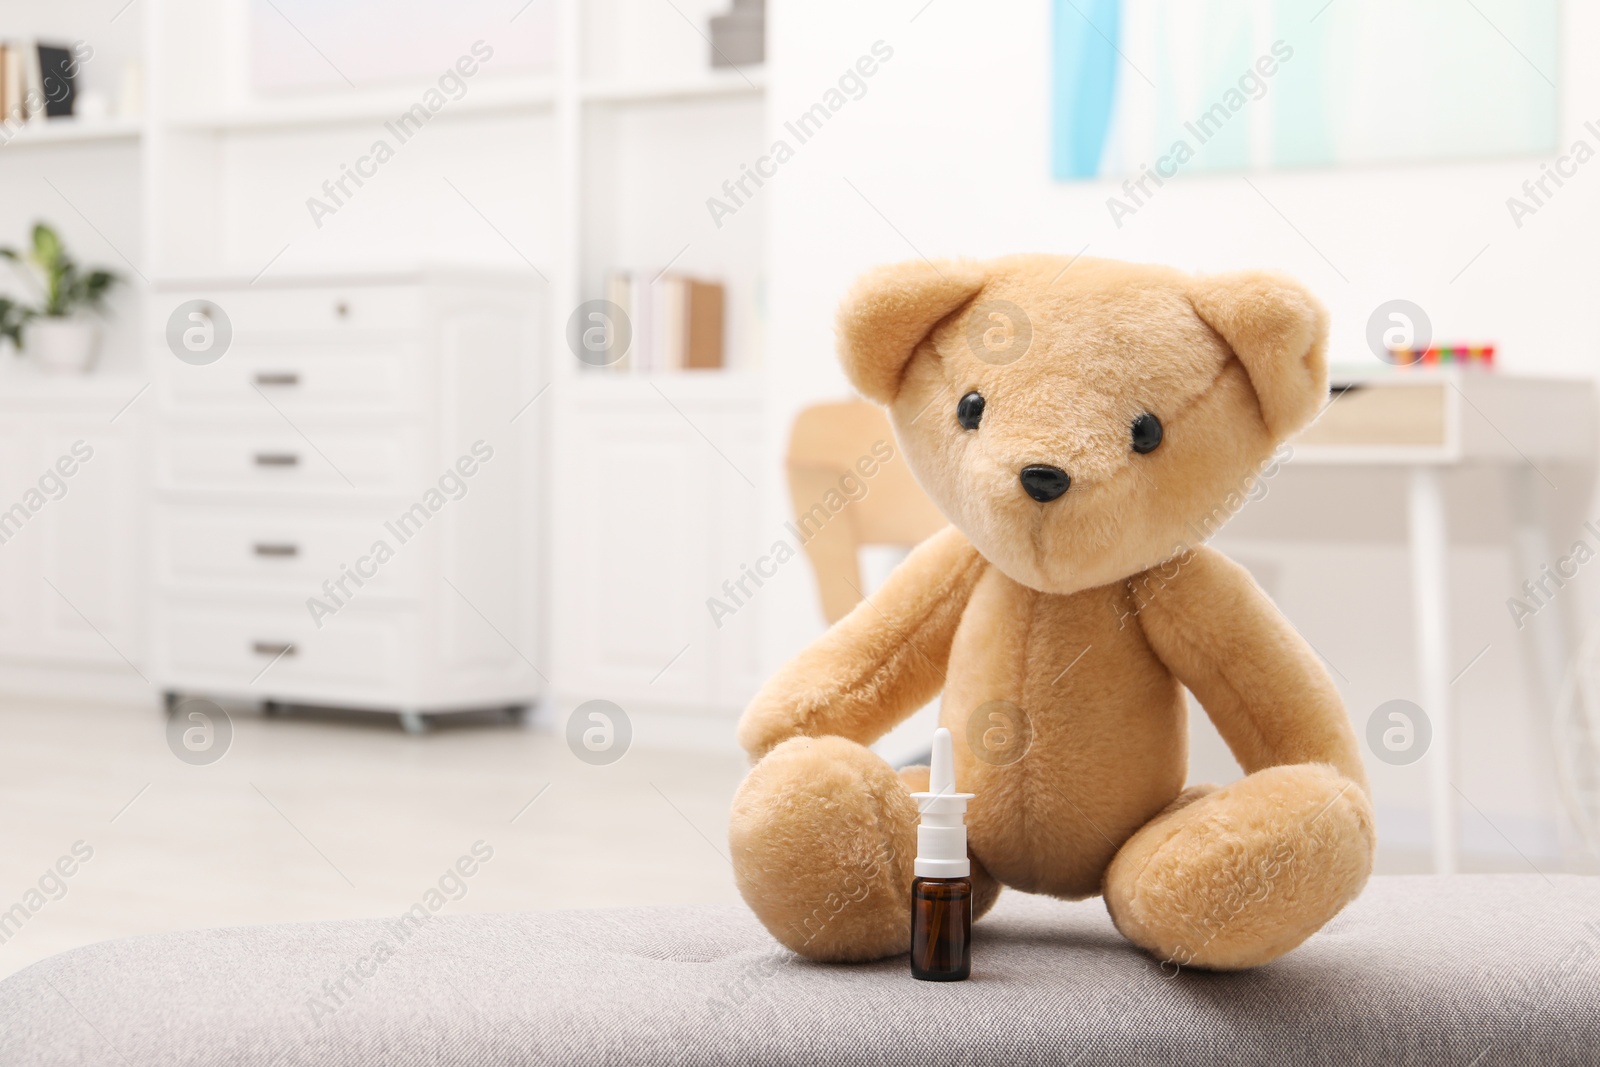 Photo of Toy cute bear with nasal spray indoors, space for text